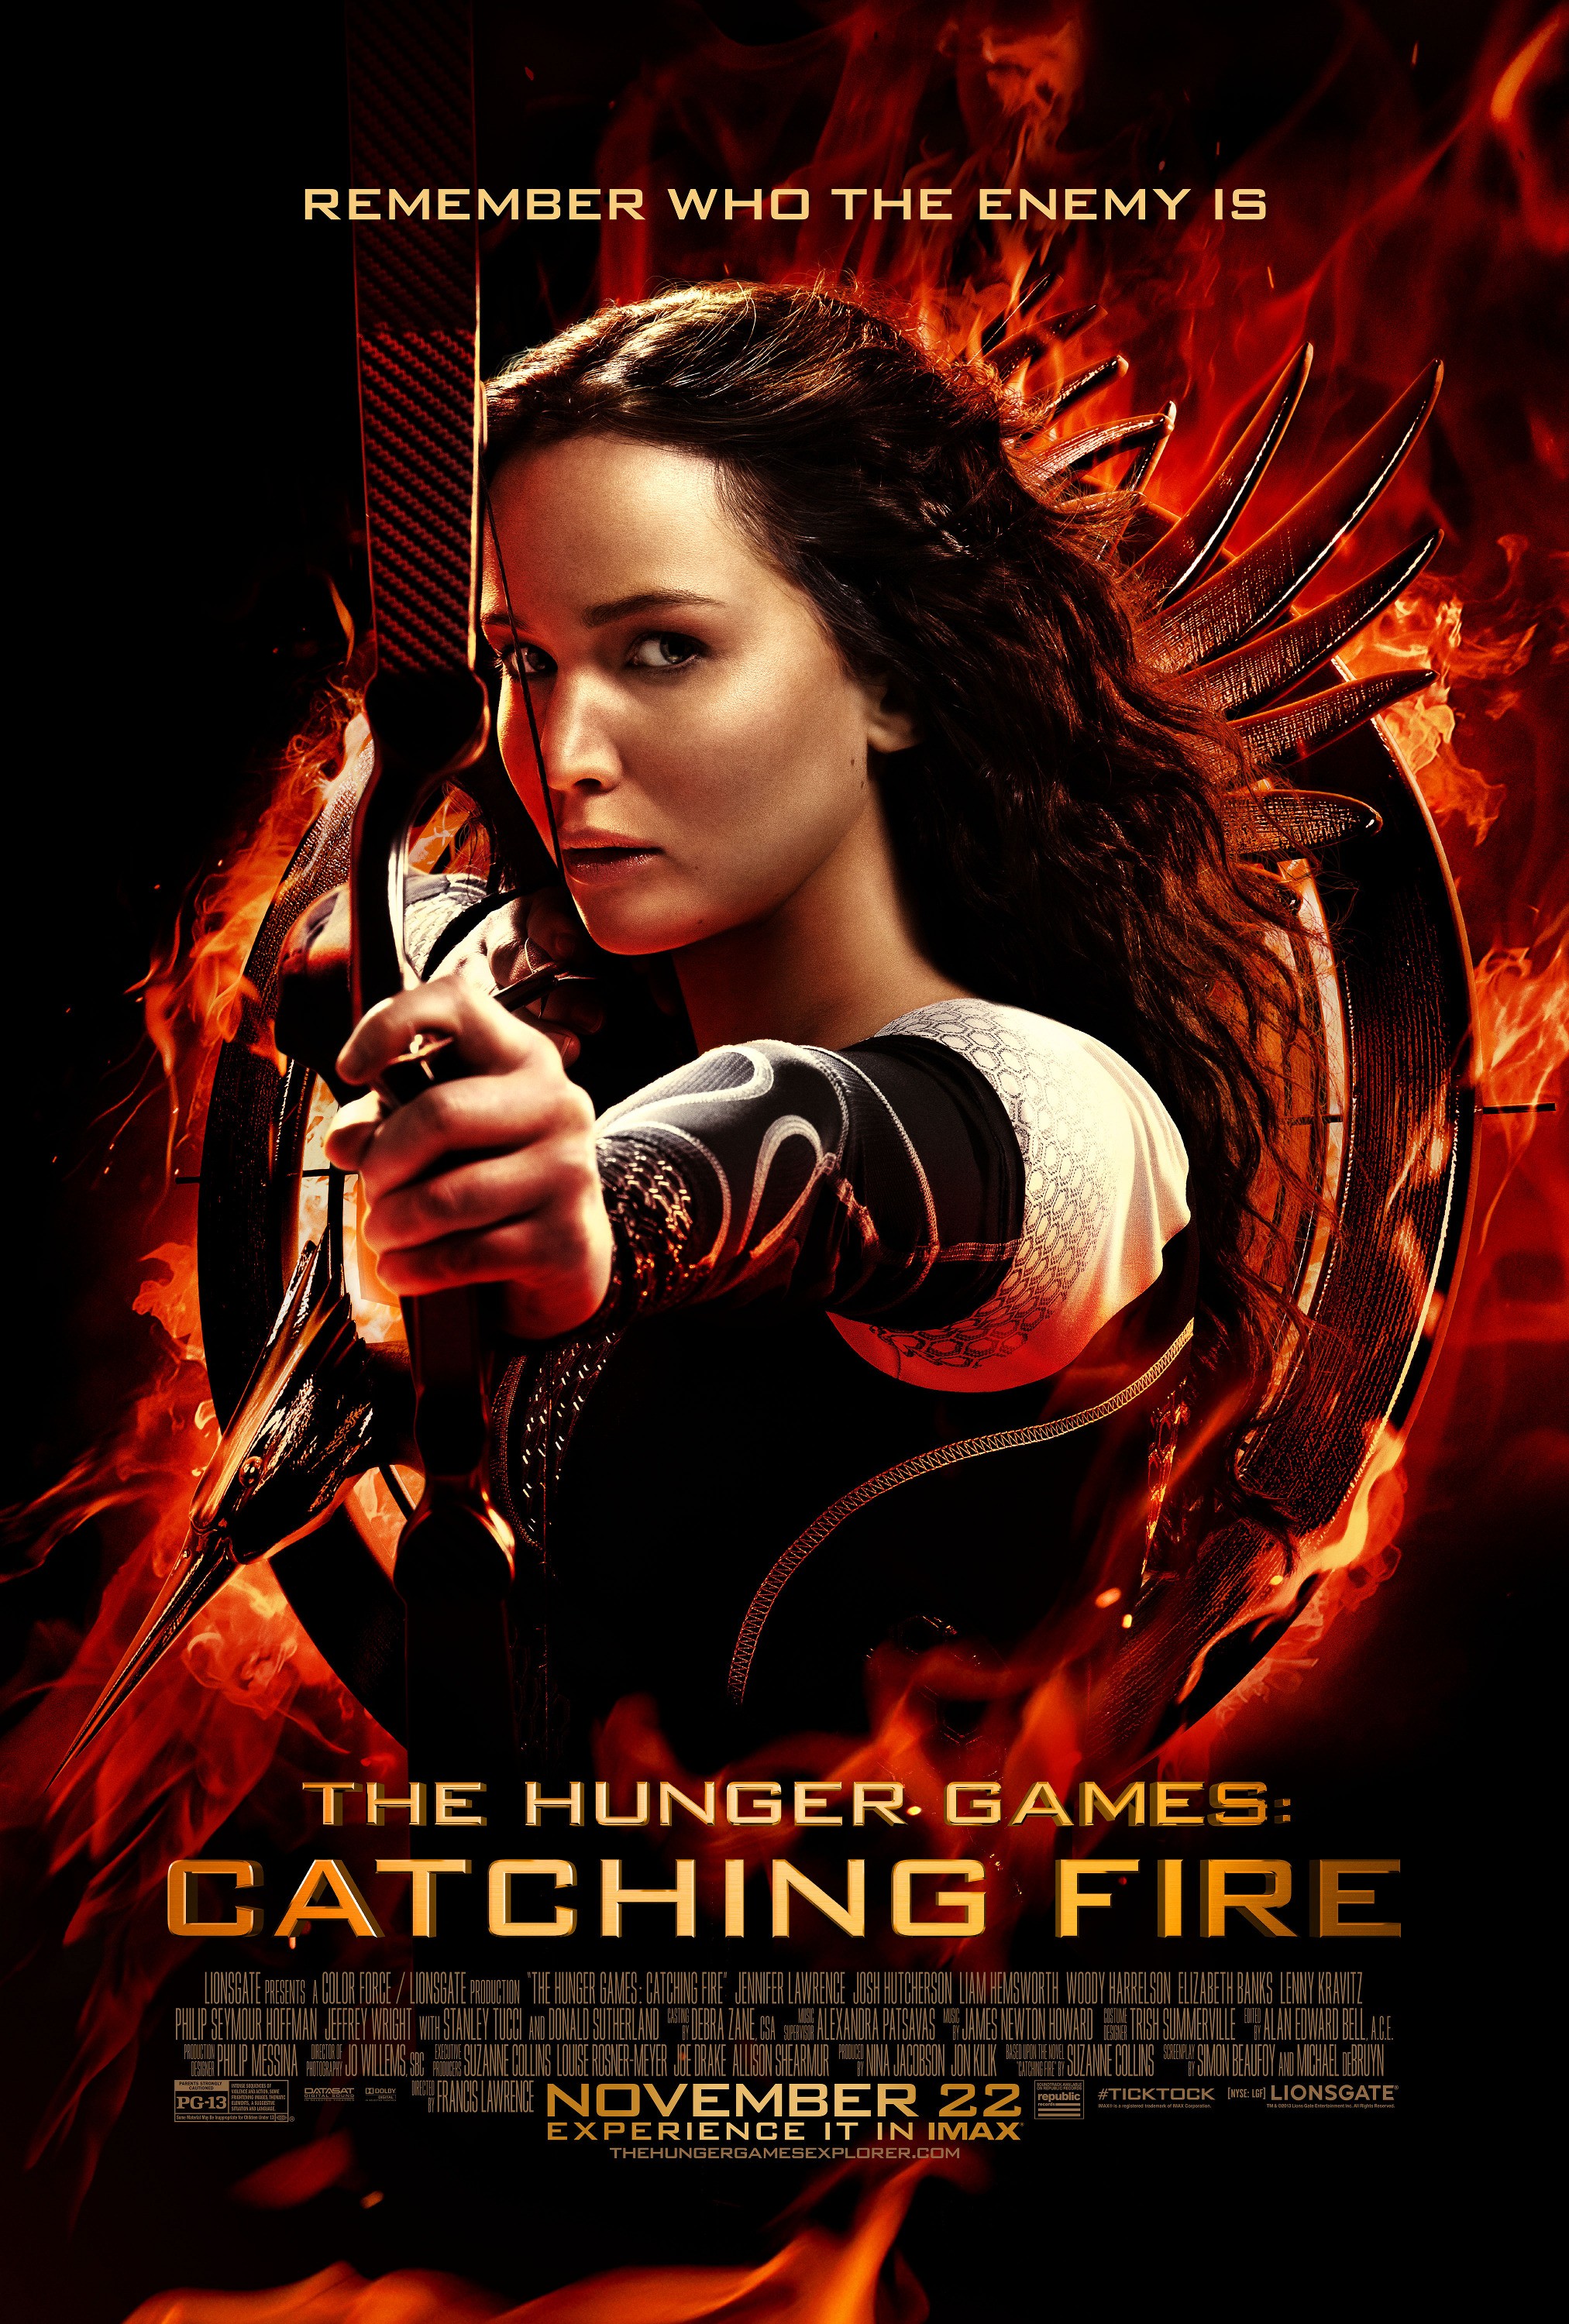 The Hunger Games: Catching Fire book to film differences | The ...